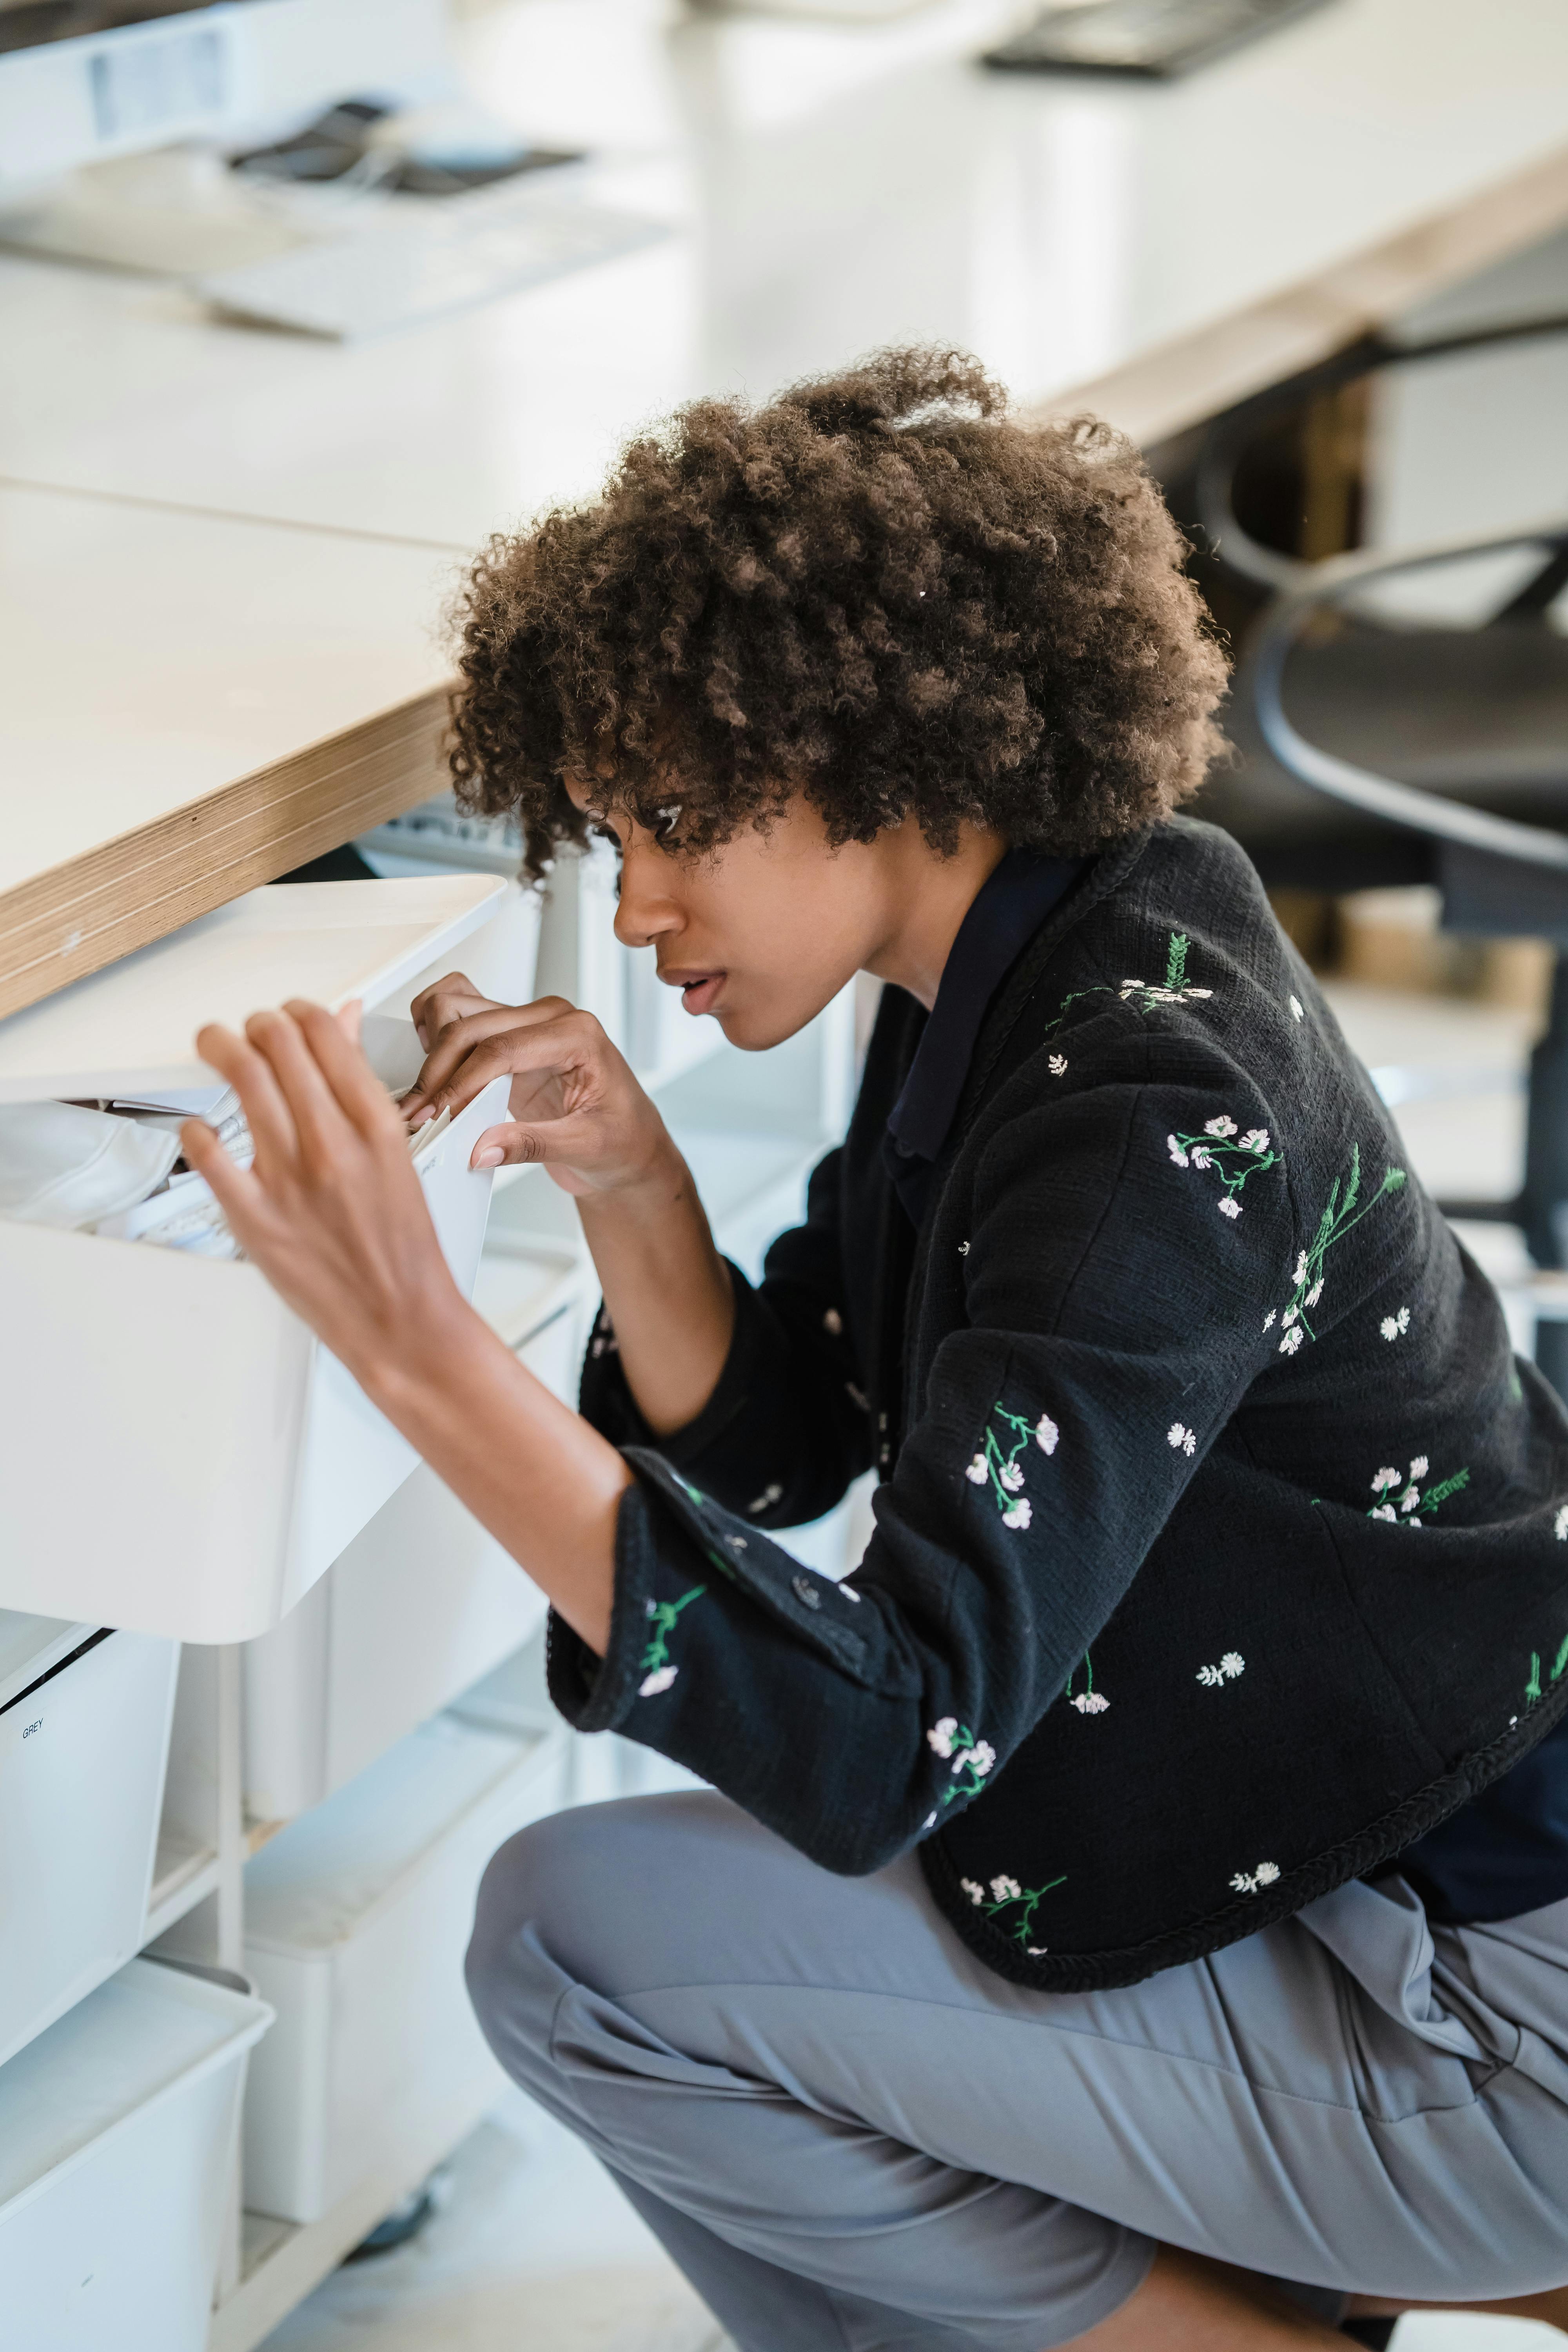 A woman searching through desk drawers | Source: Pexels